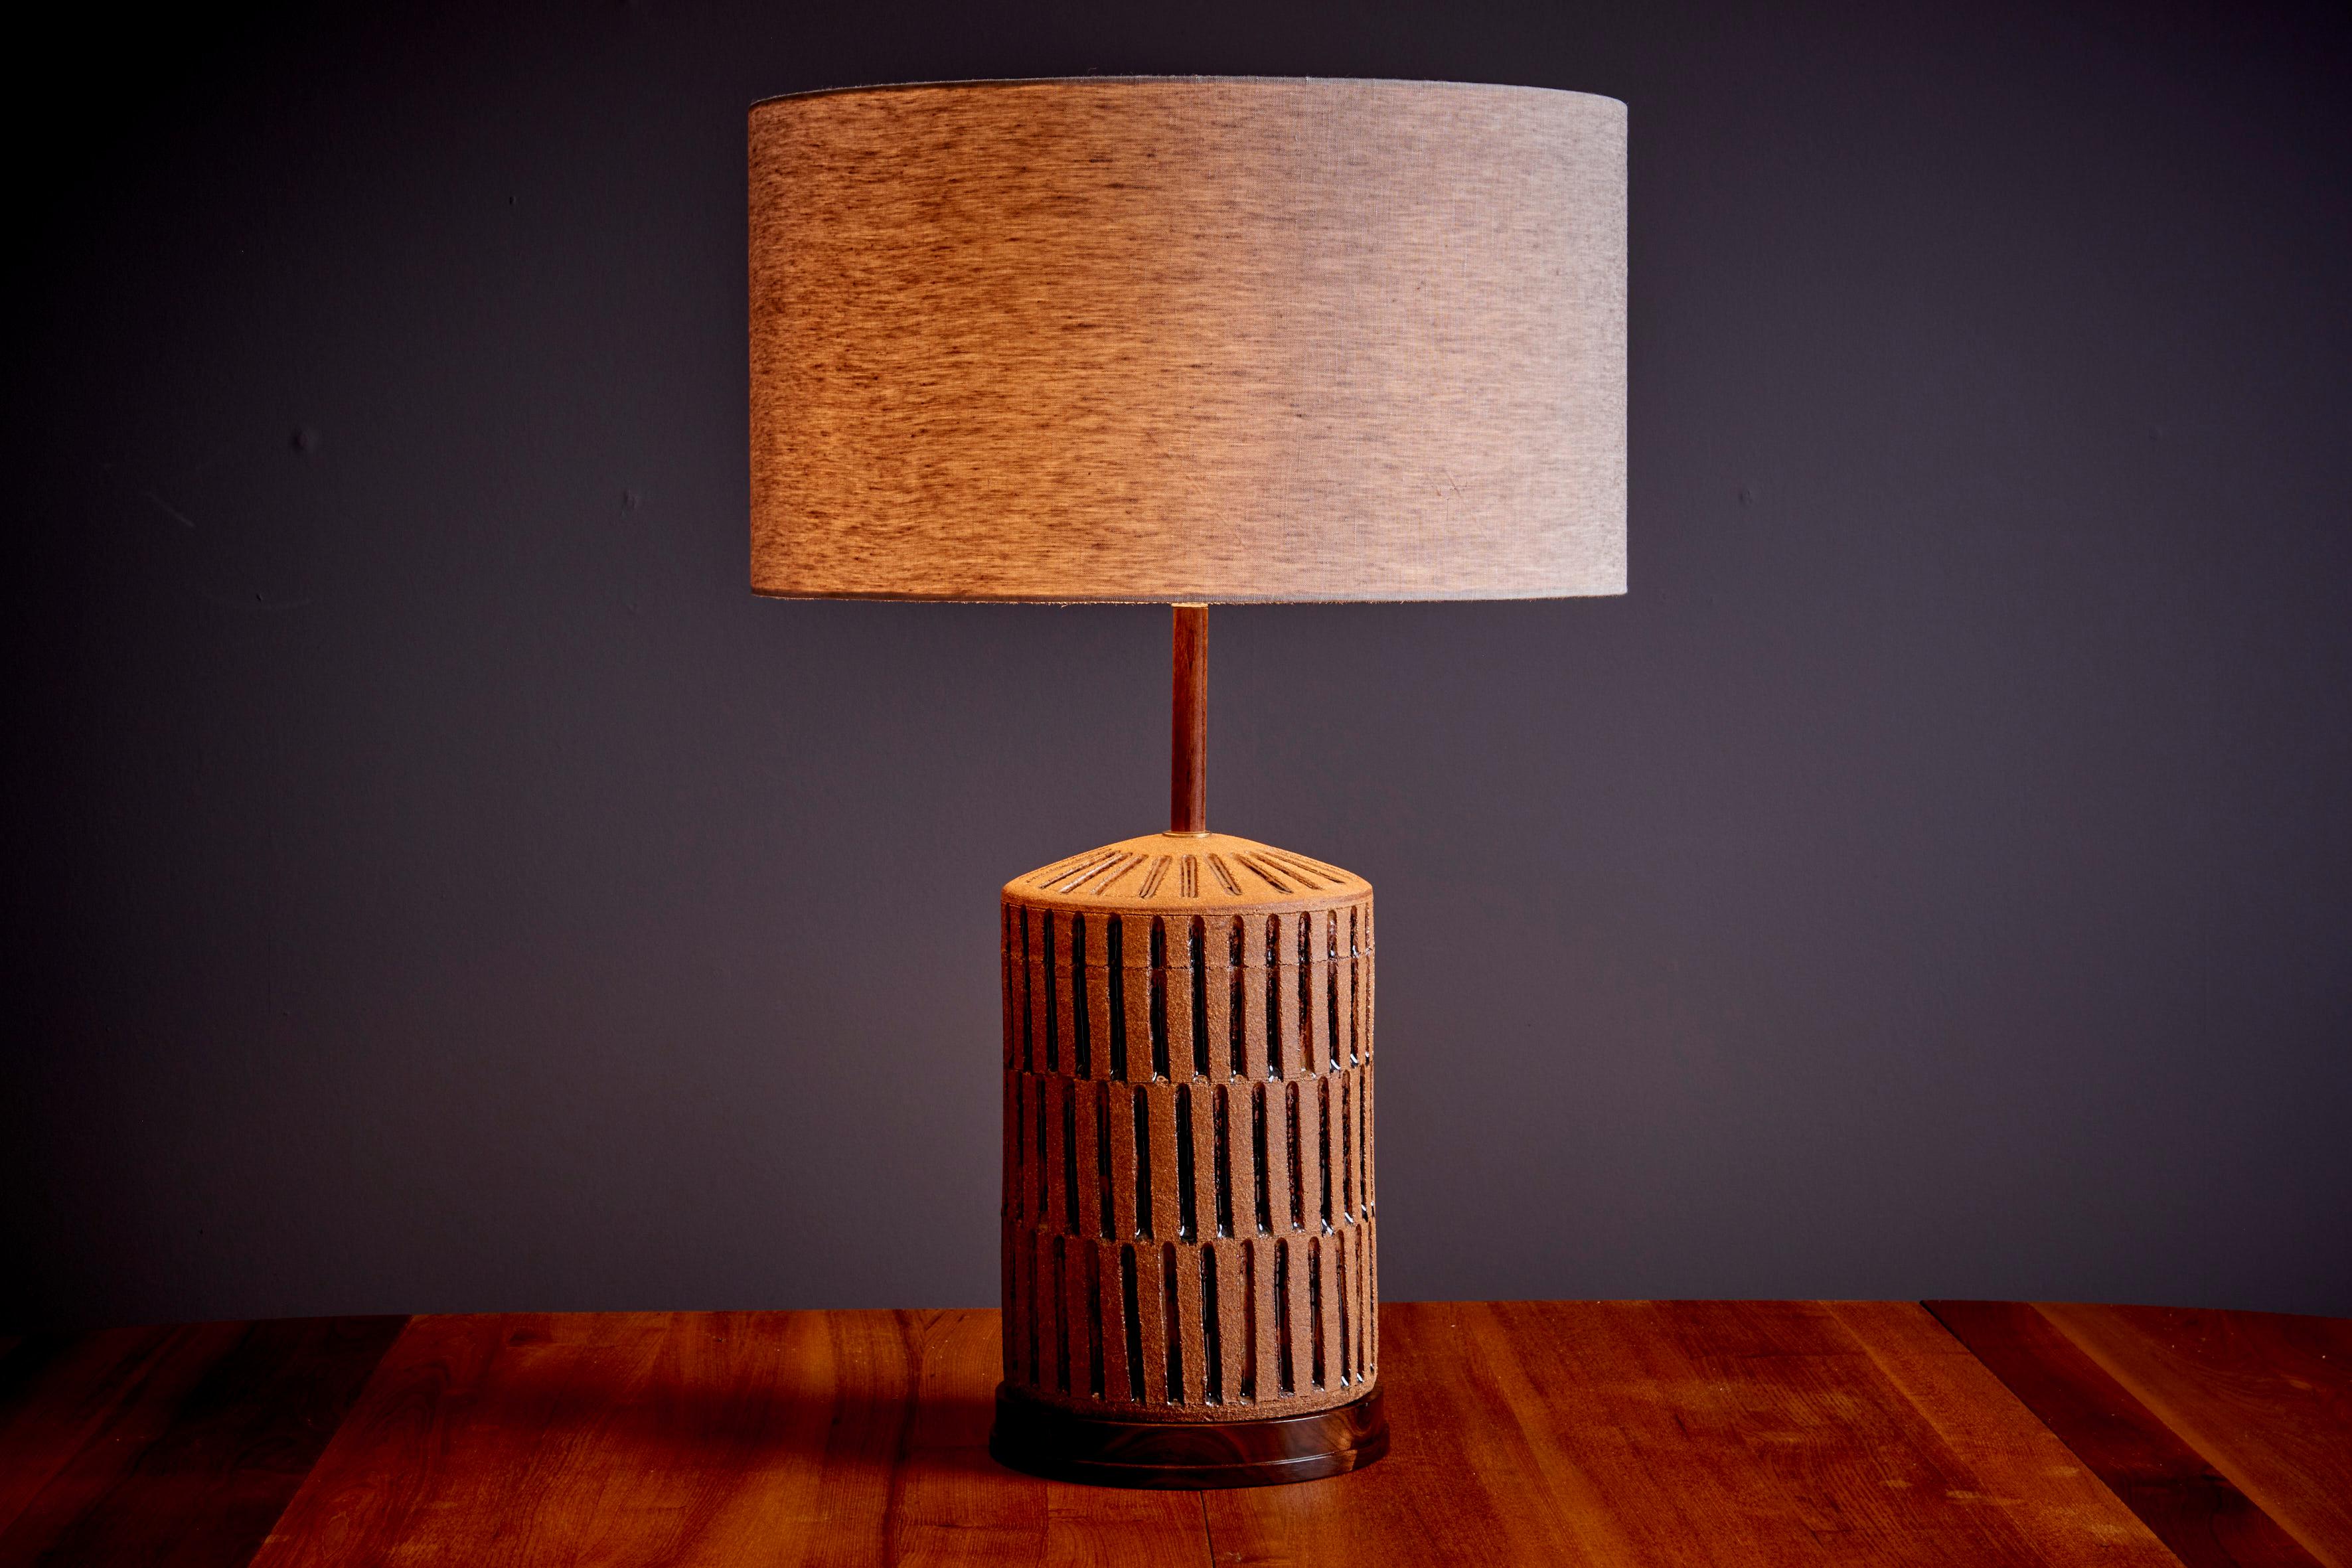 Hand-crafted Ceramic Table Lamp with Base in American Walnut by Brent Bennett. The measurements given apply to the lampbase. 